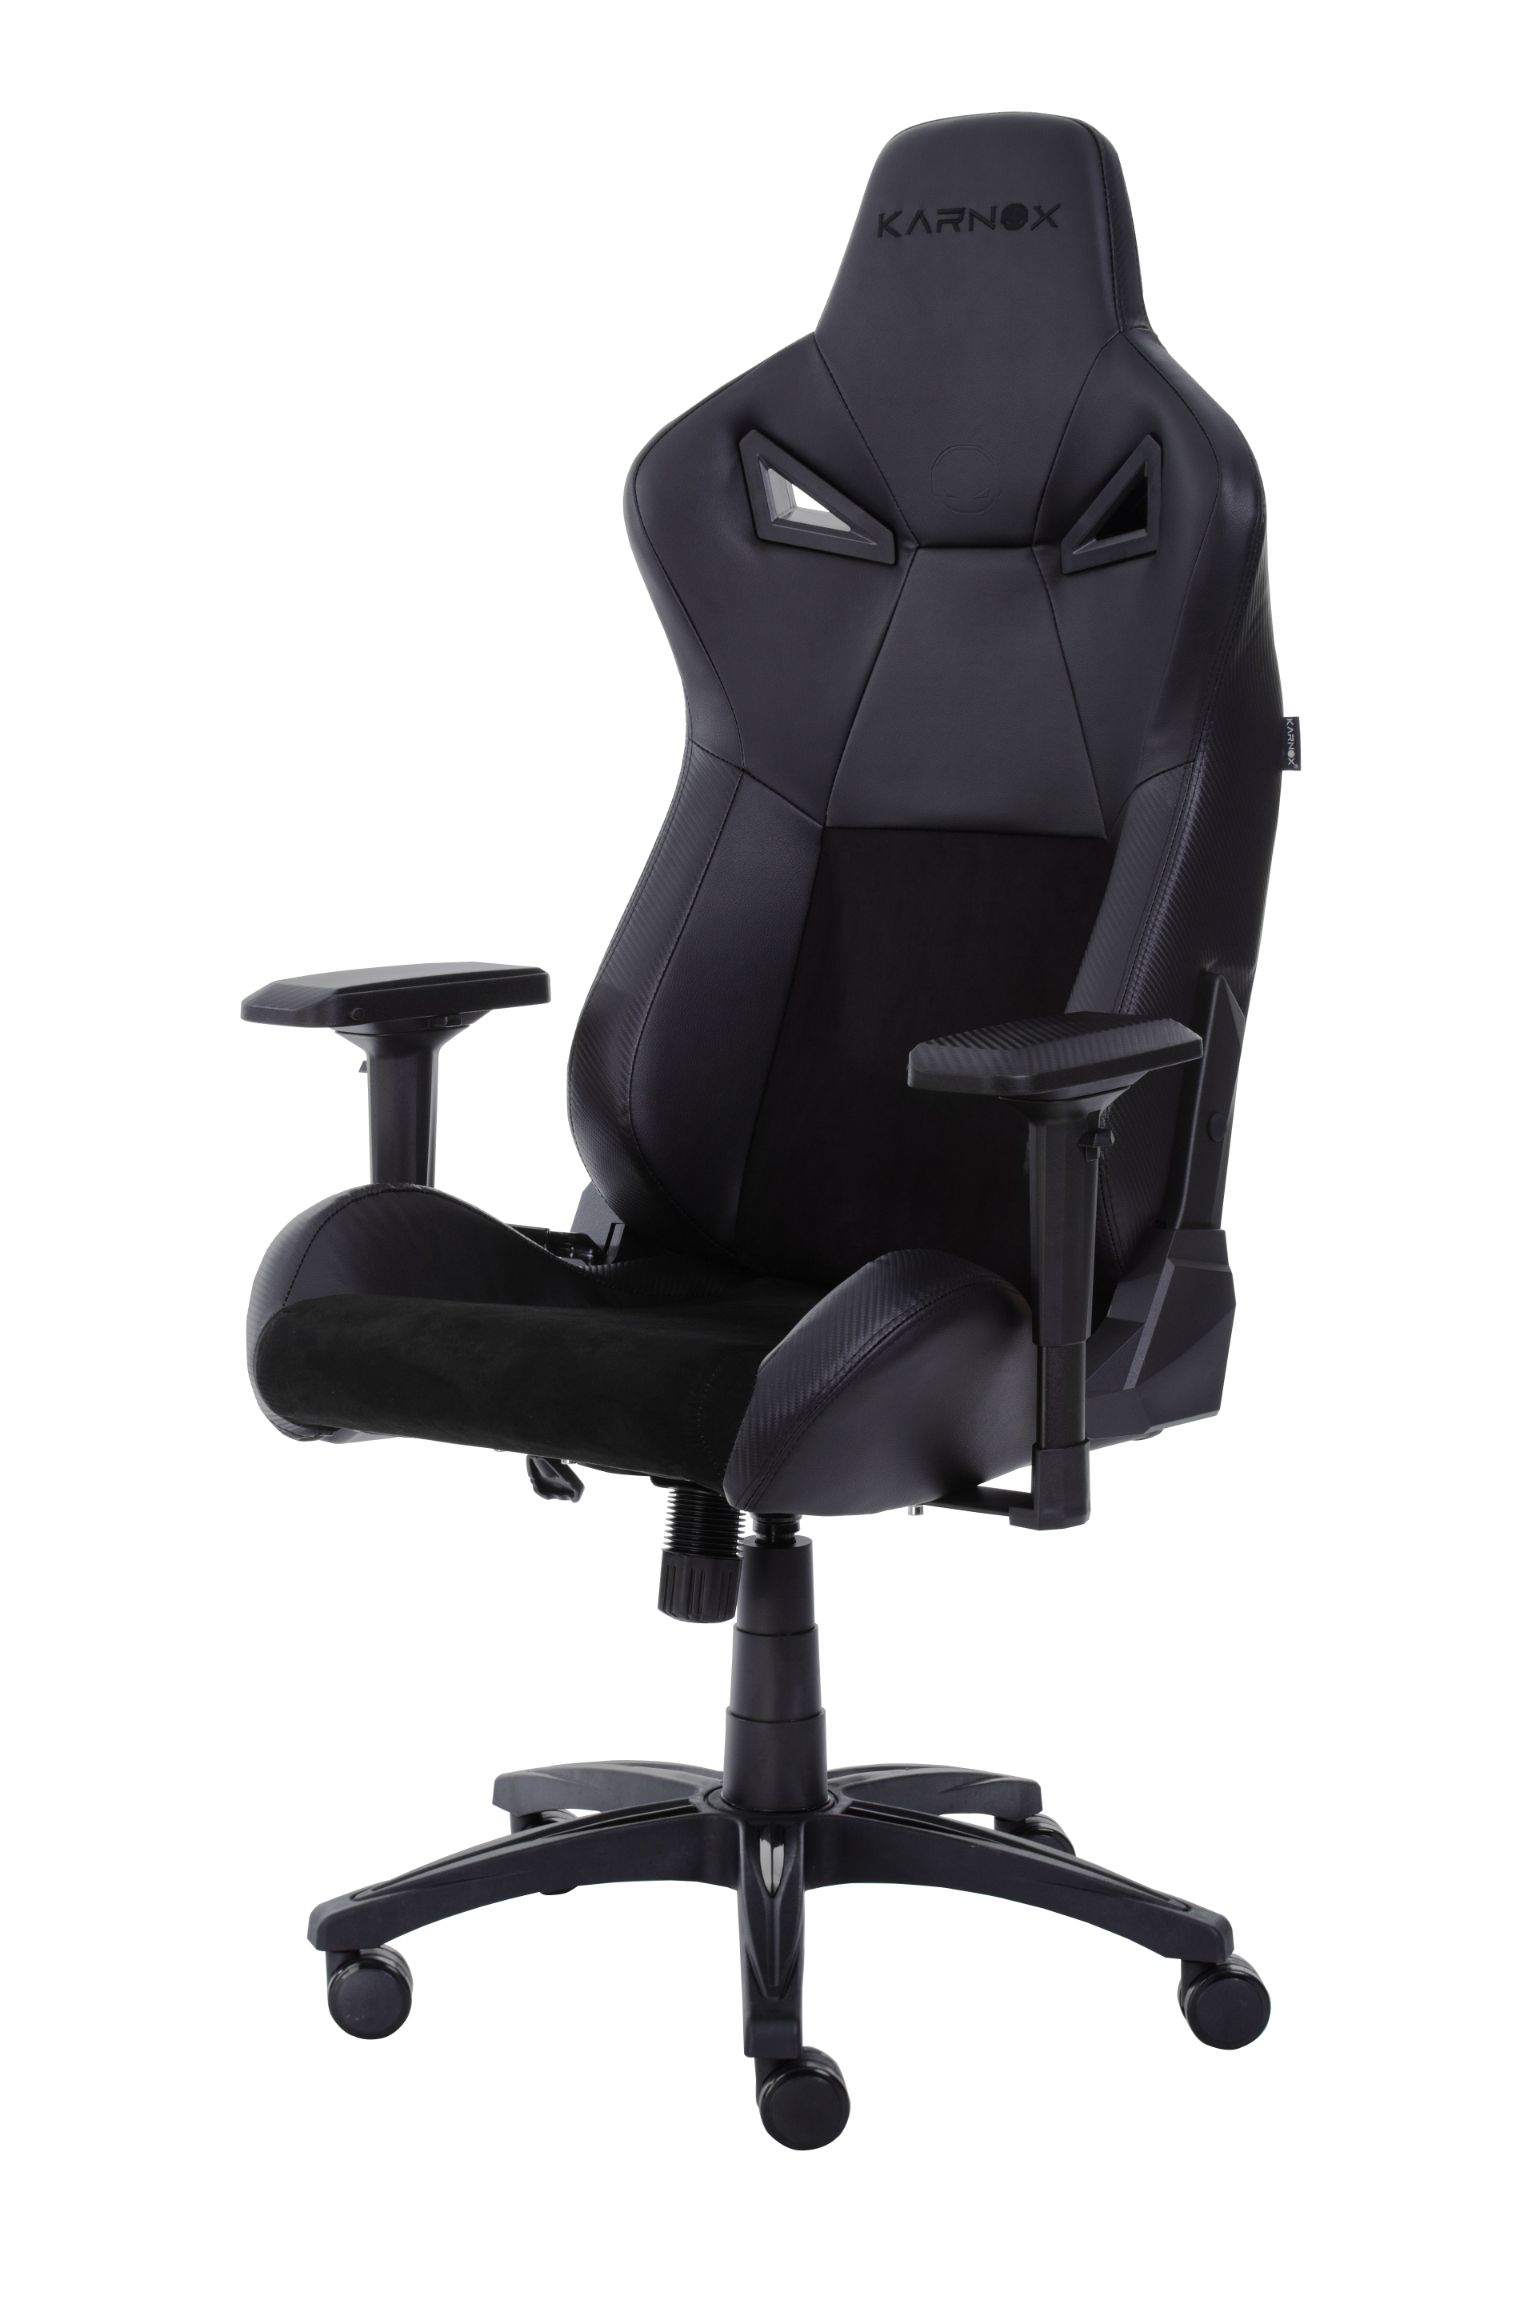 Simple Gaming Chair Canada Reviews for Small Space